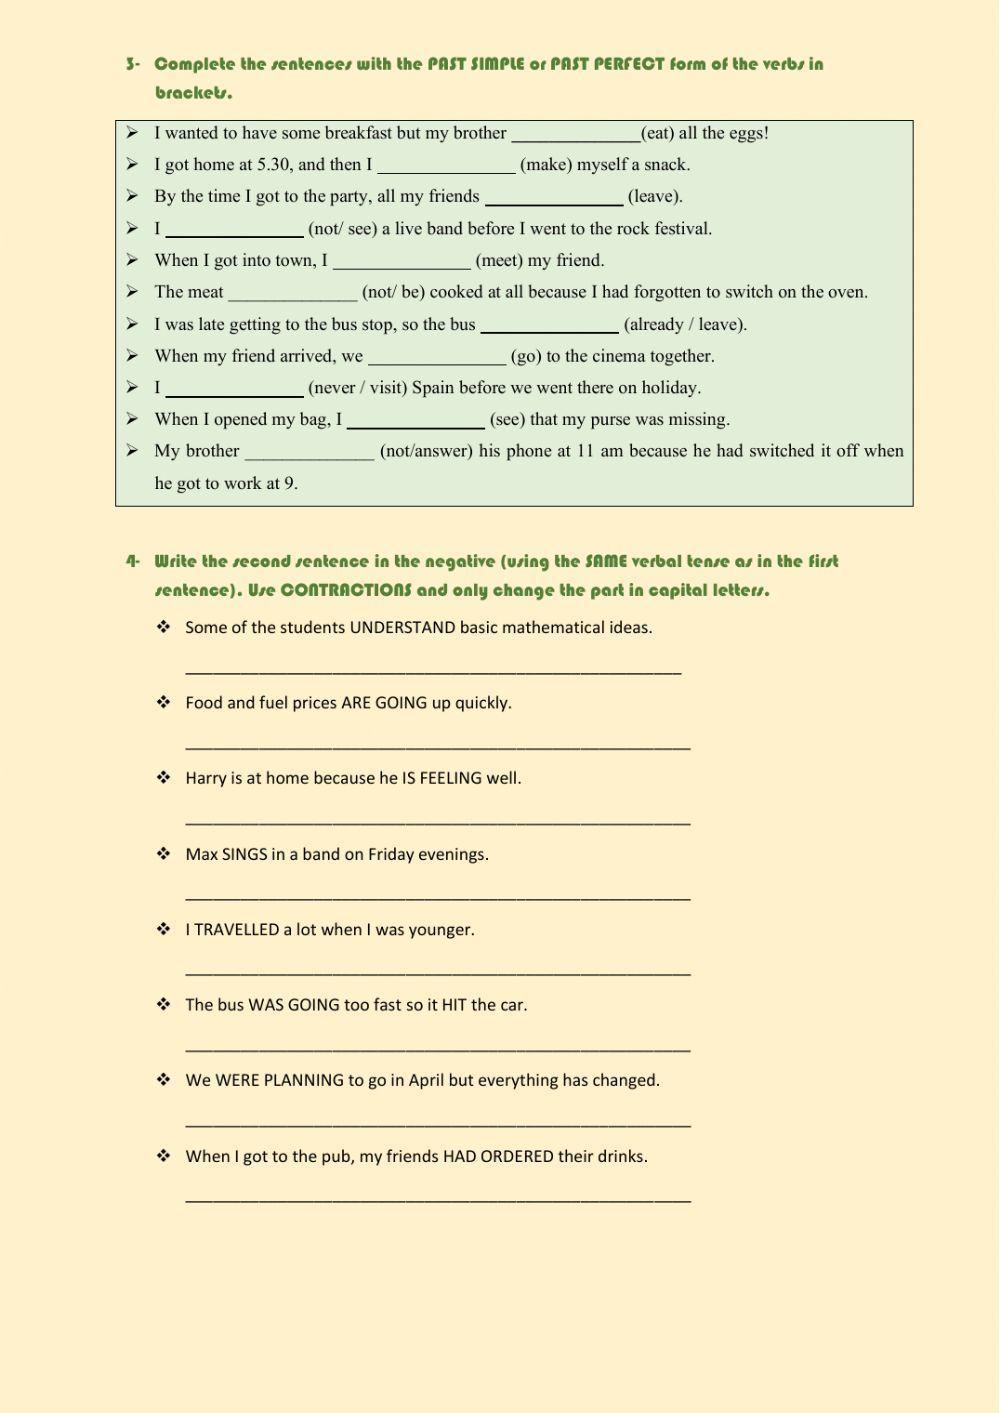 Present and past verbal tenses revision